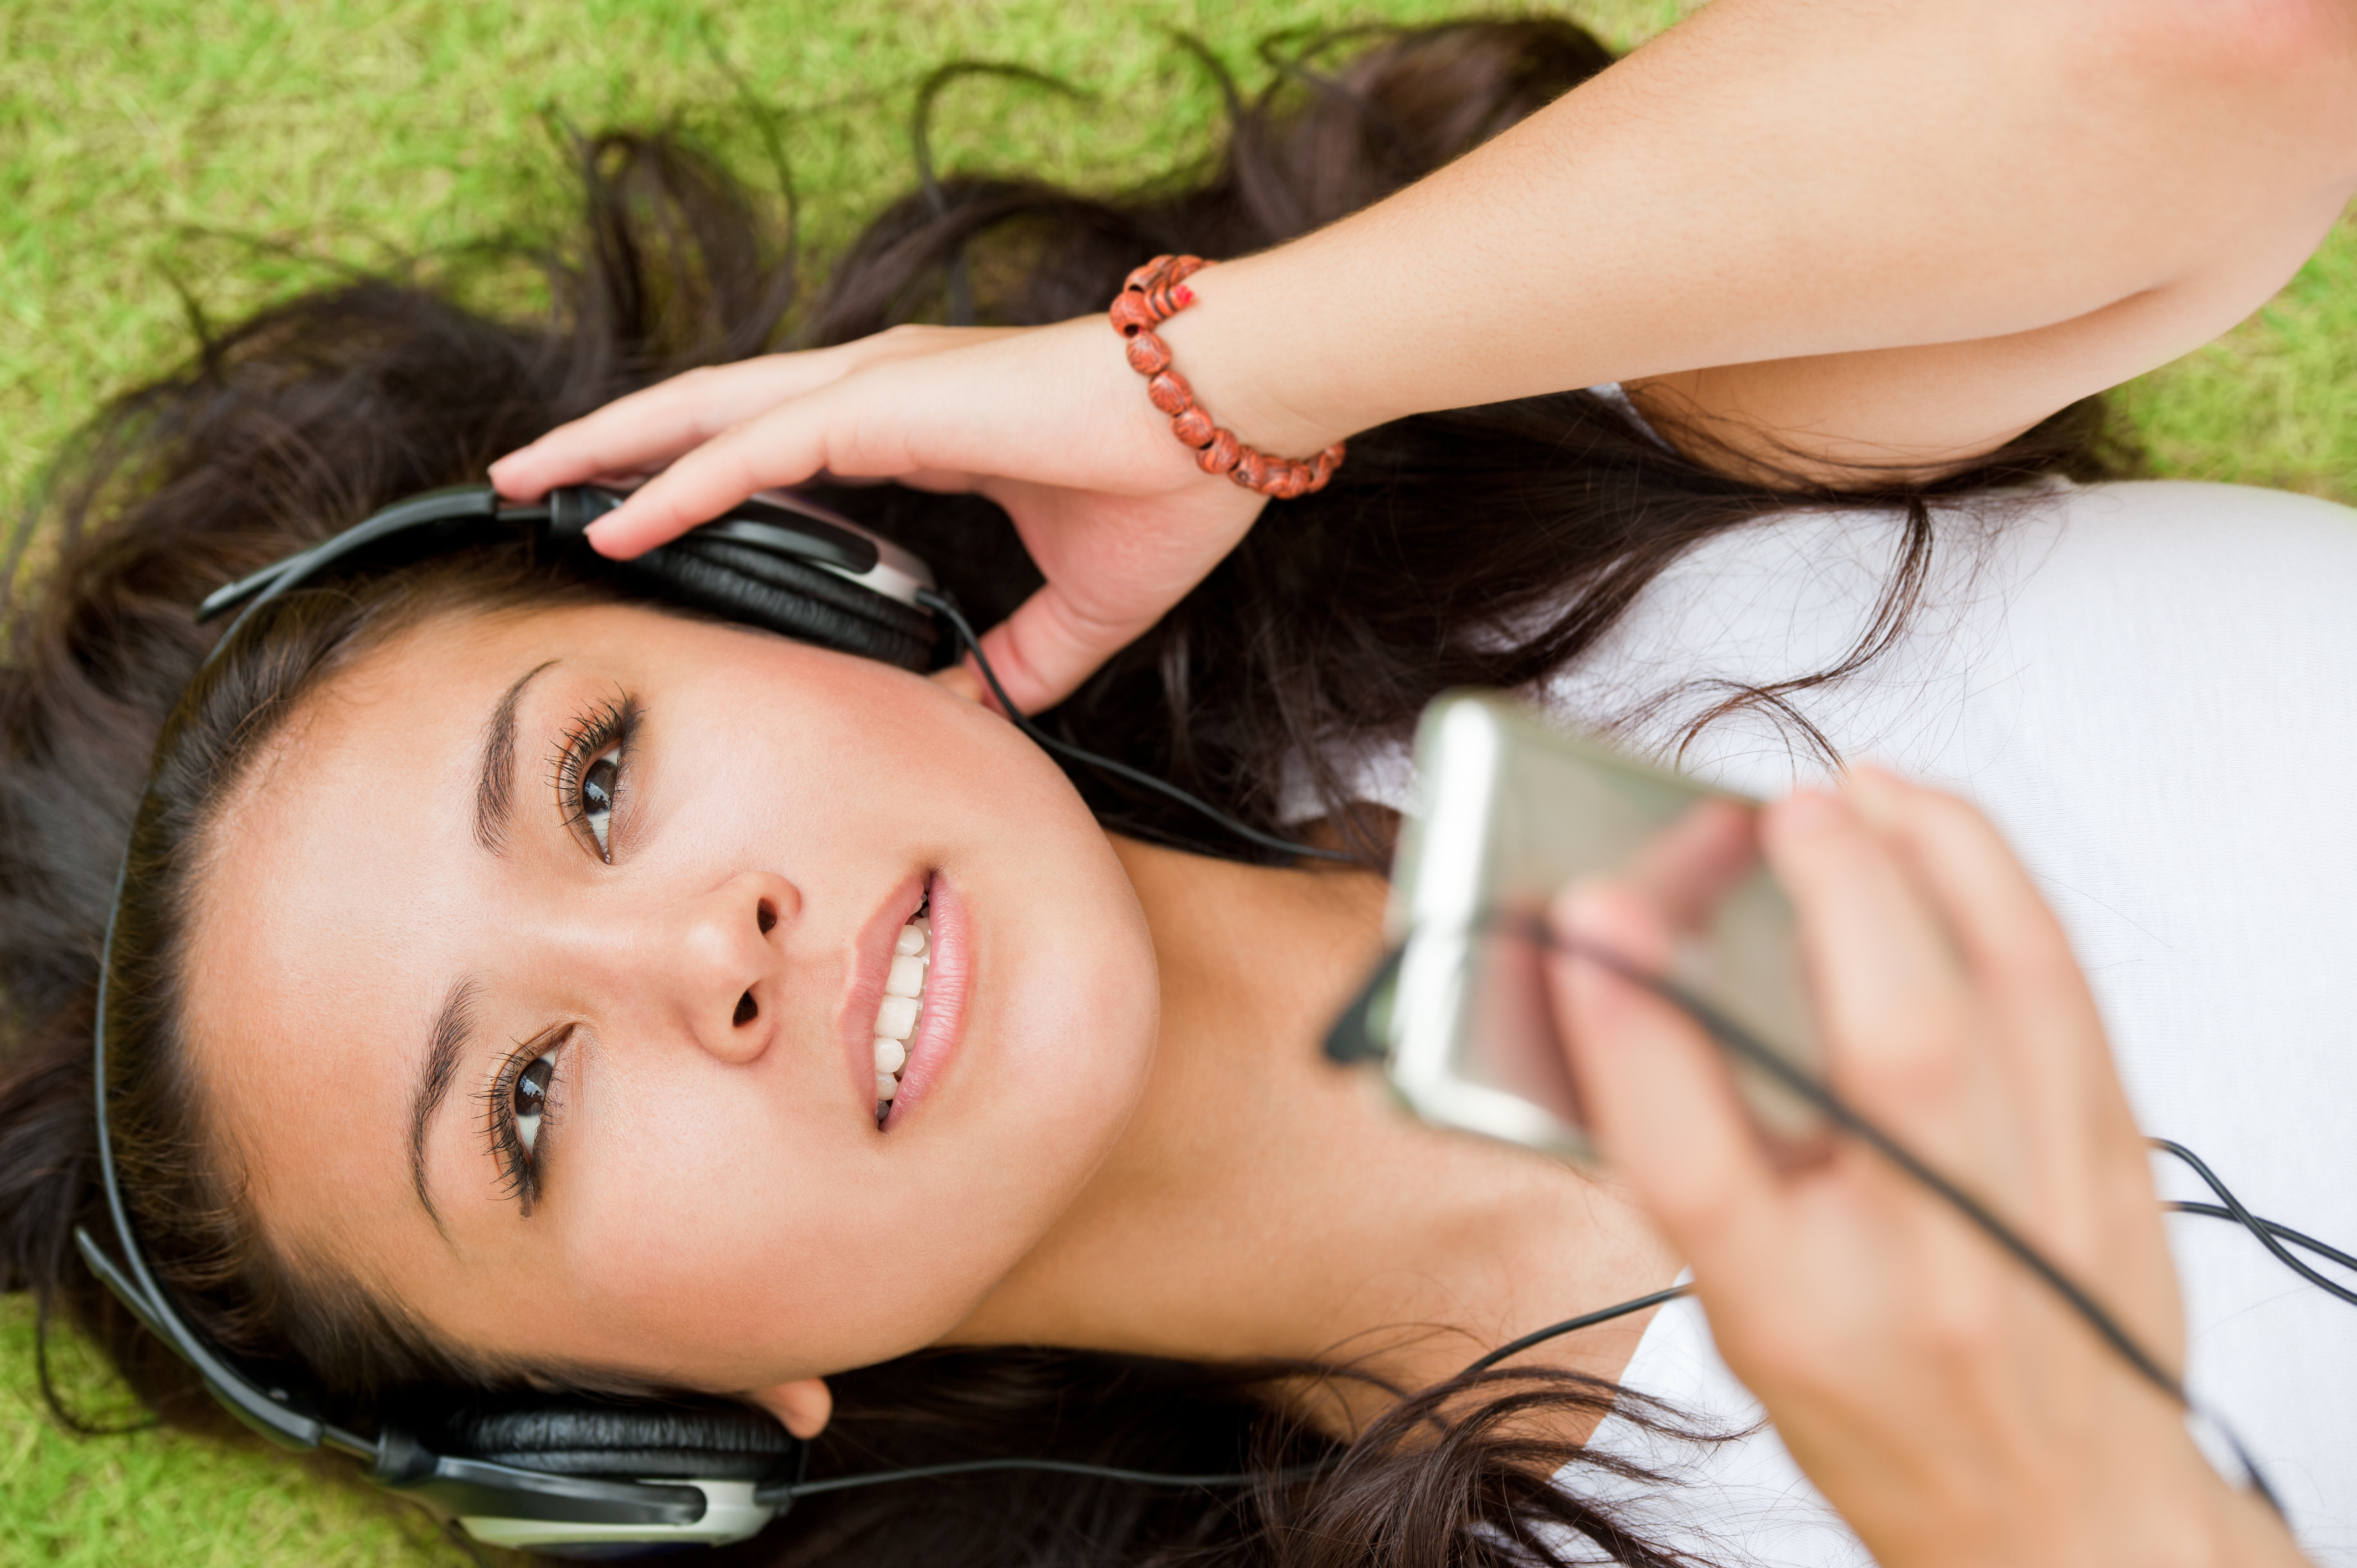 Self Hypnosis Audio - A woman listening to headphones lying on her back on grass